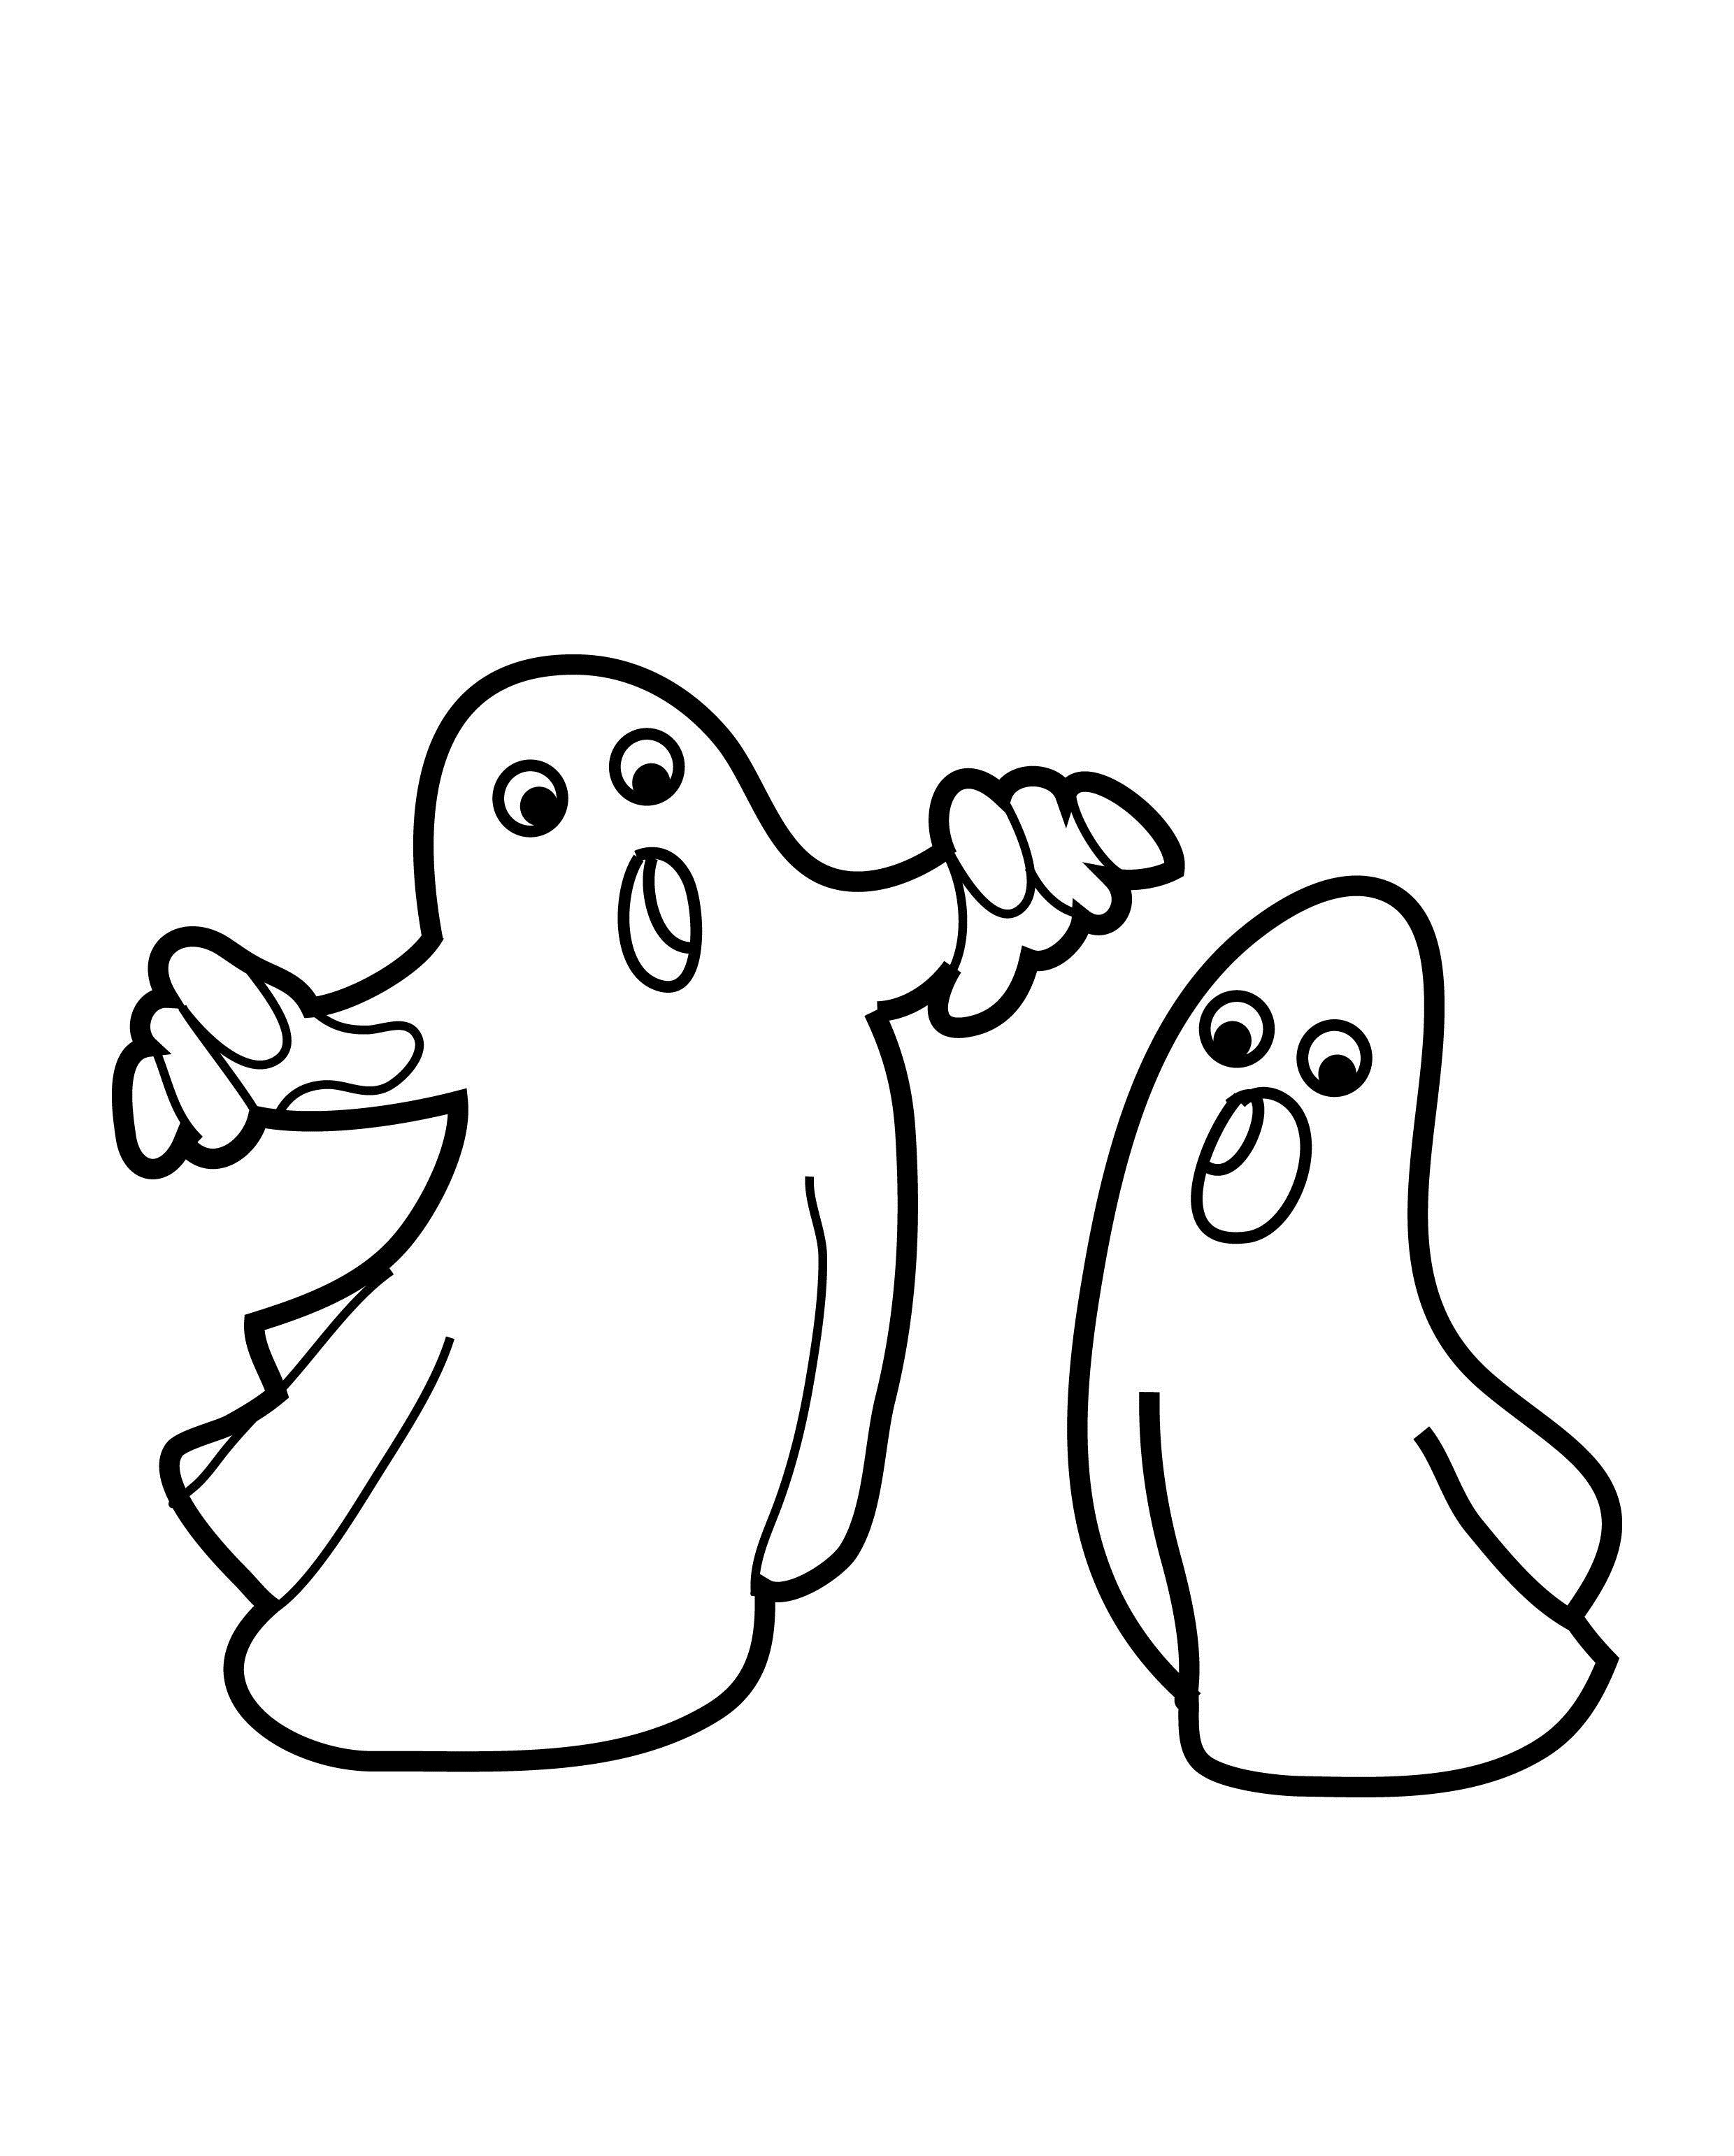 Ghost coloring pages to download and print for free